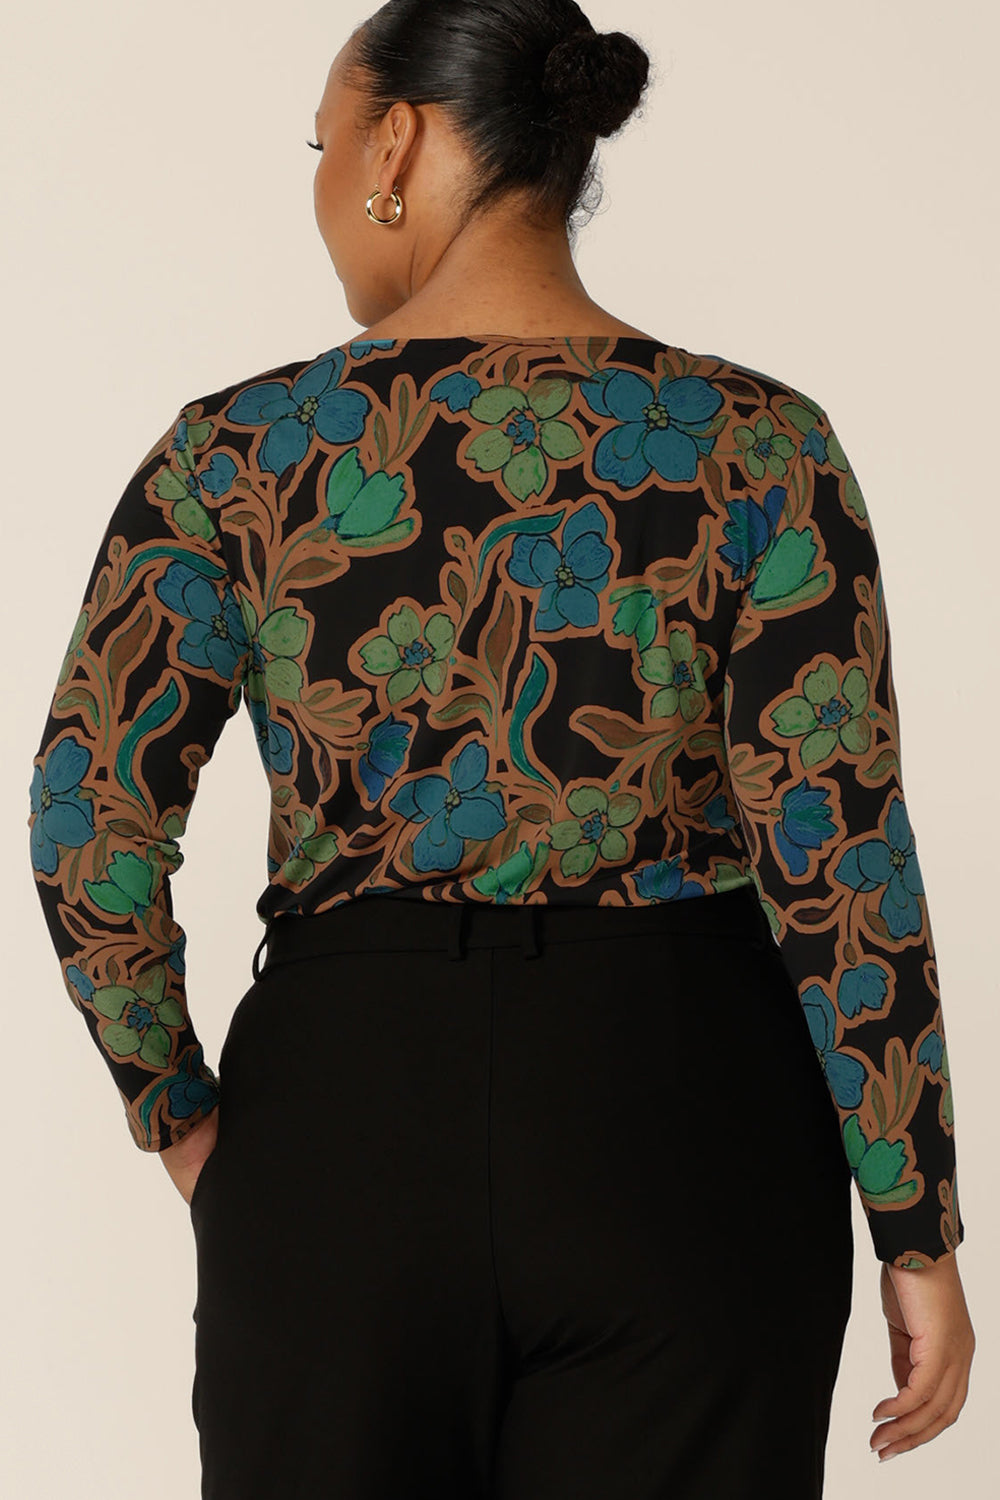 Back view of a fuller figure, size 18 woman wearing a boat neck jersey top with long sleeves. In an opulent floral print, this slim-fit jersey top is made in Australia by Australian and New Zealand, size inclusive women's clothing brand, L&F.